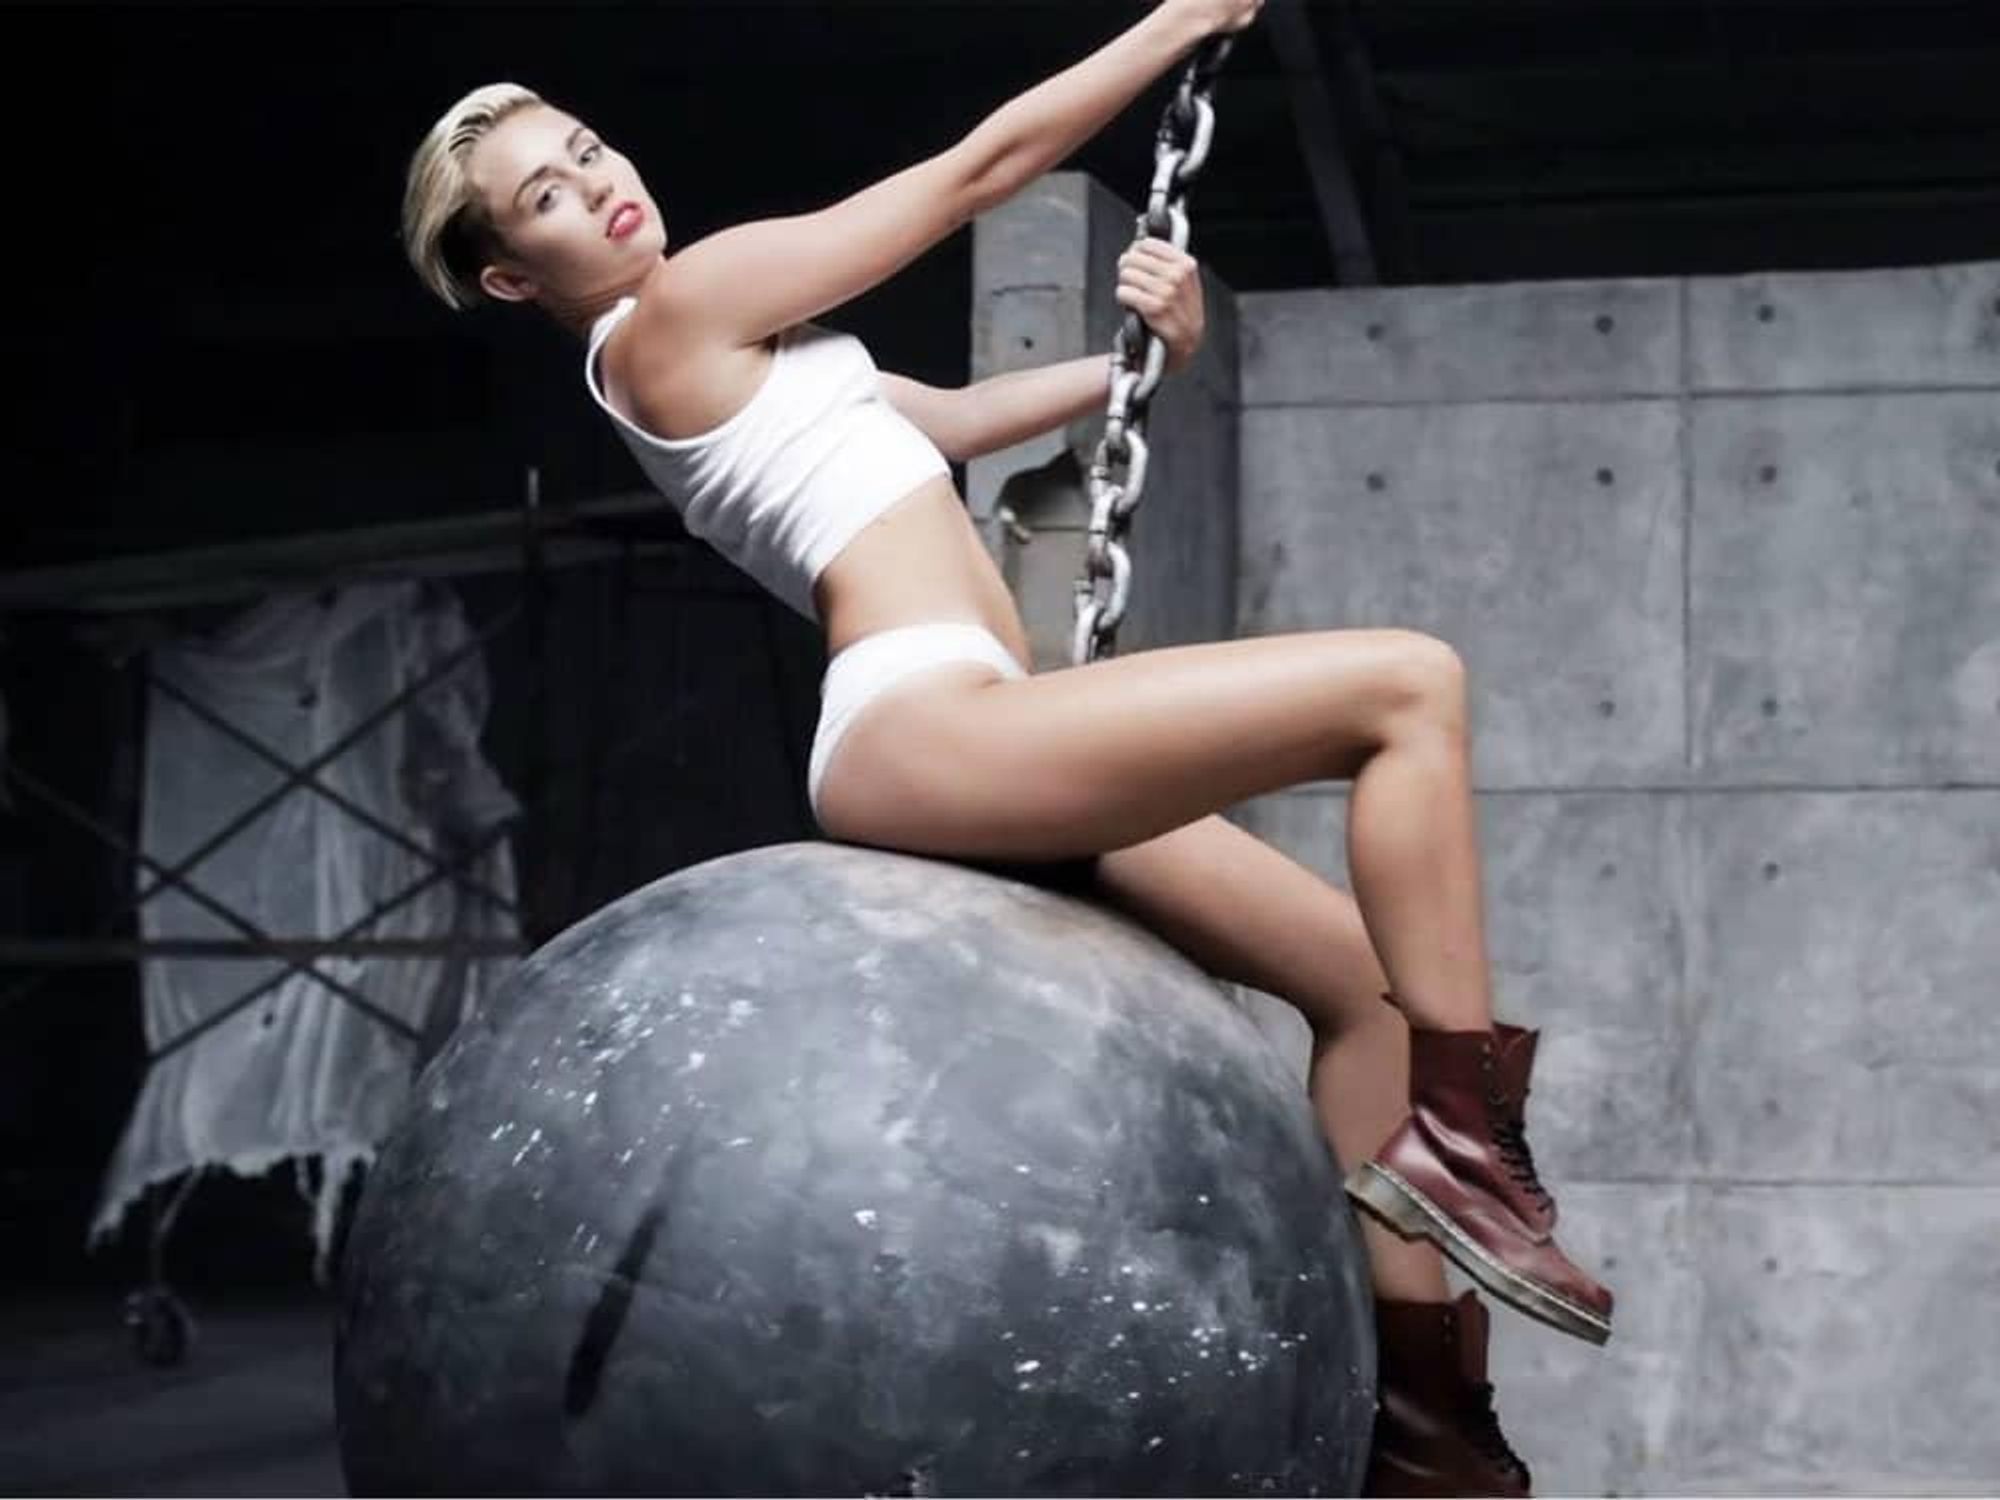 Miley Cyrus Wrecking Ball video